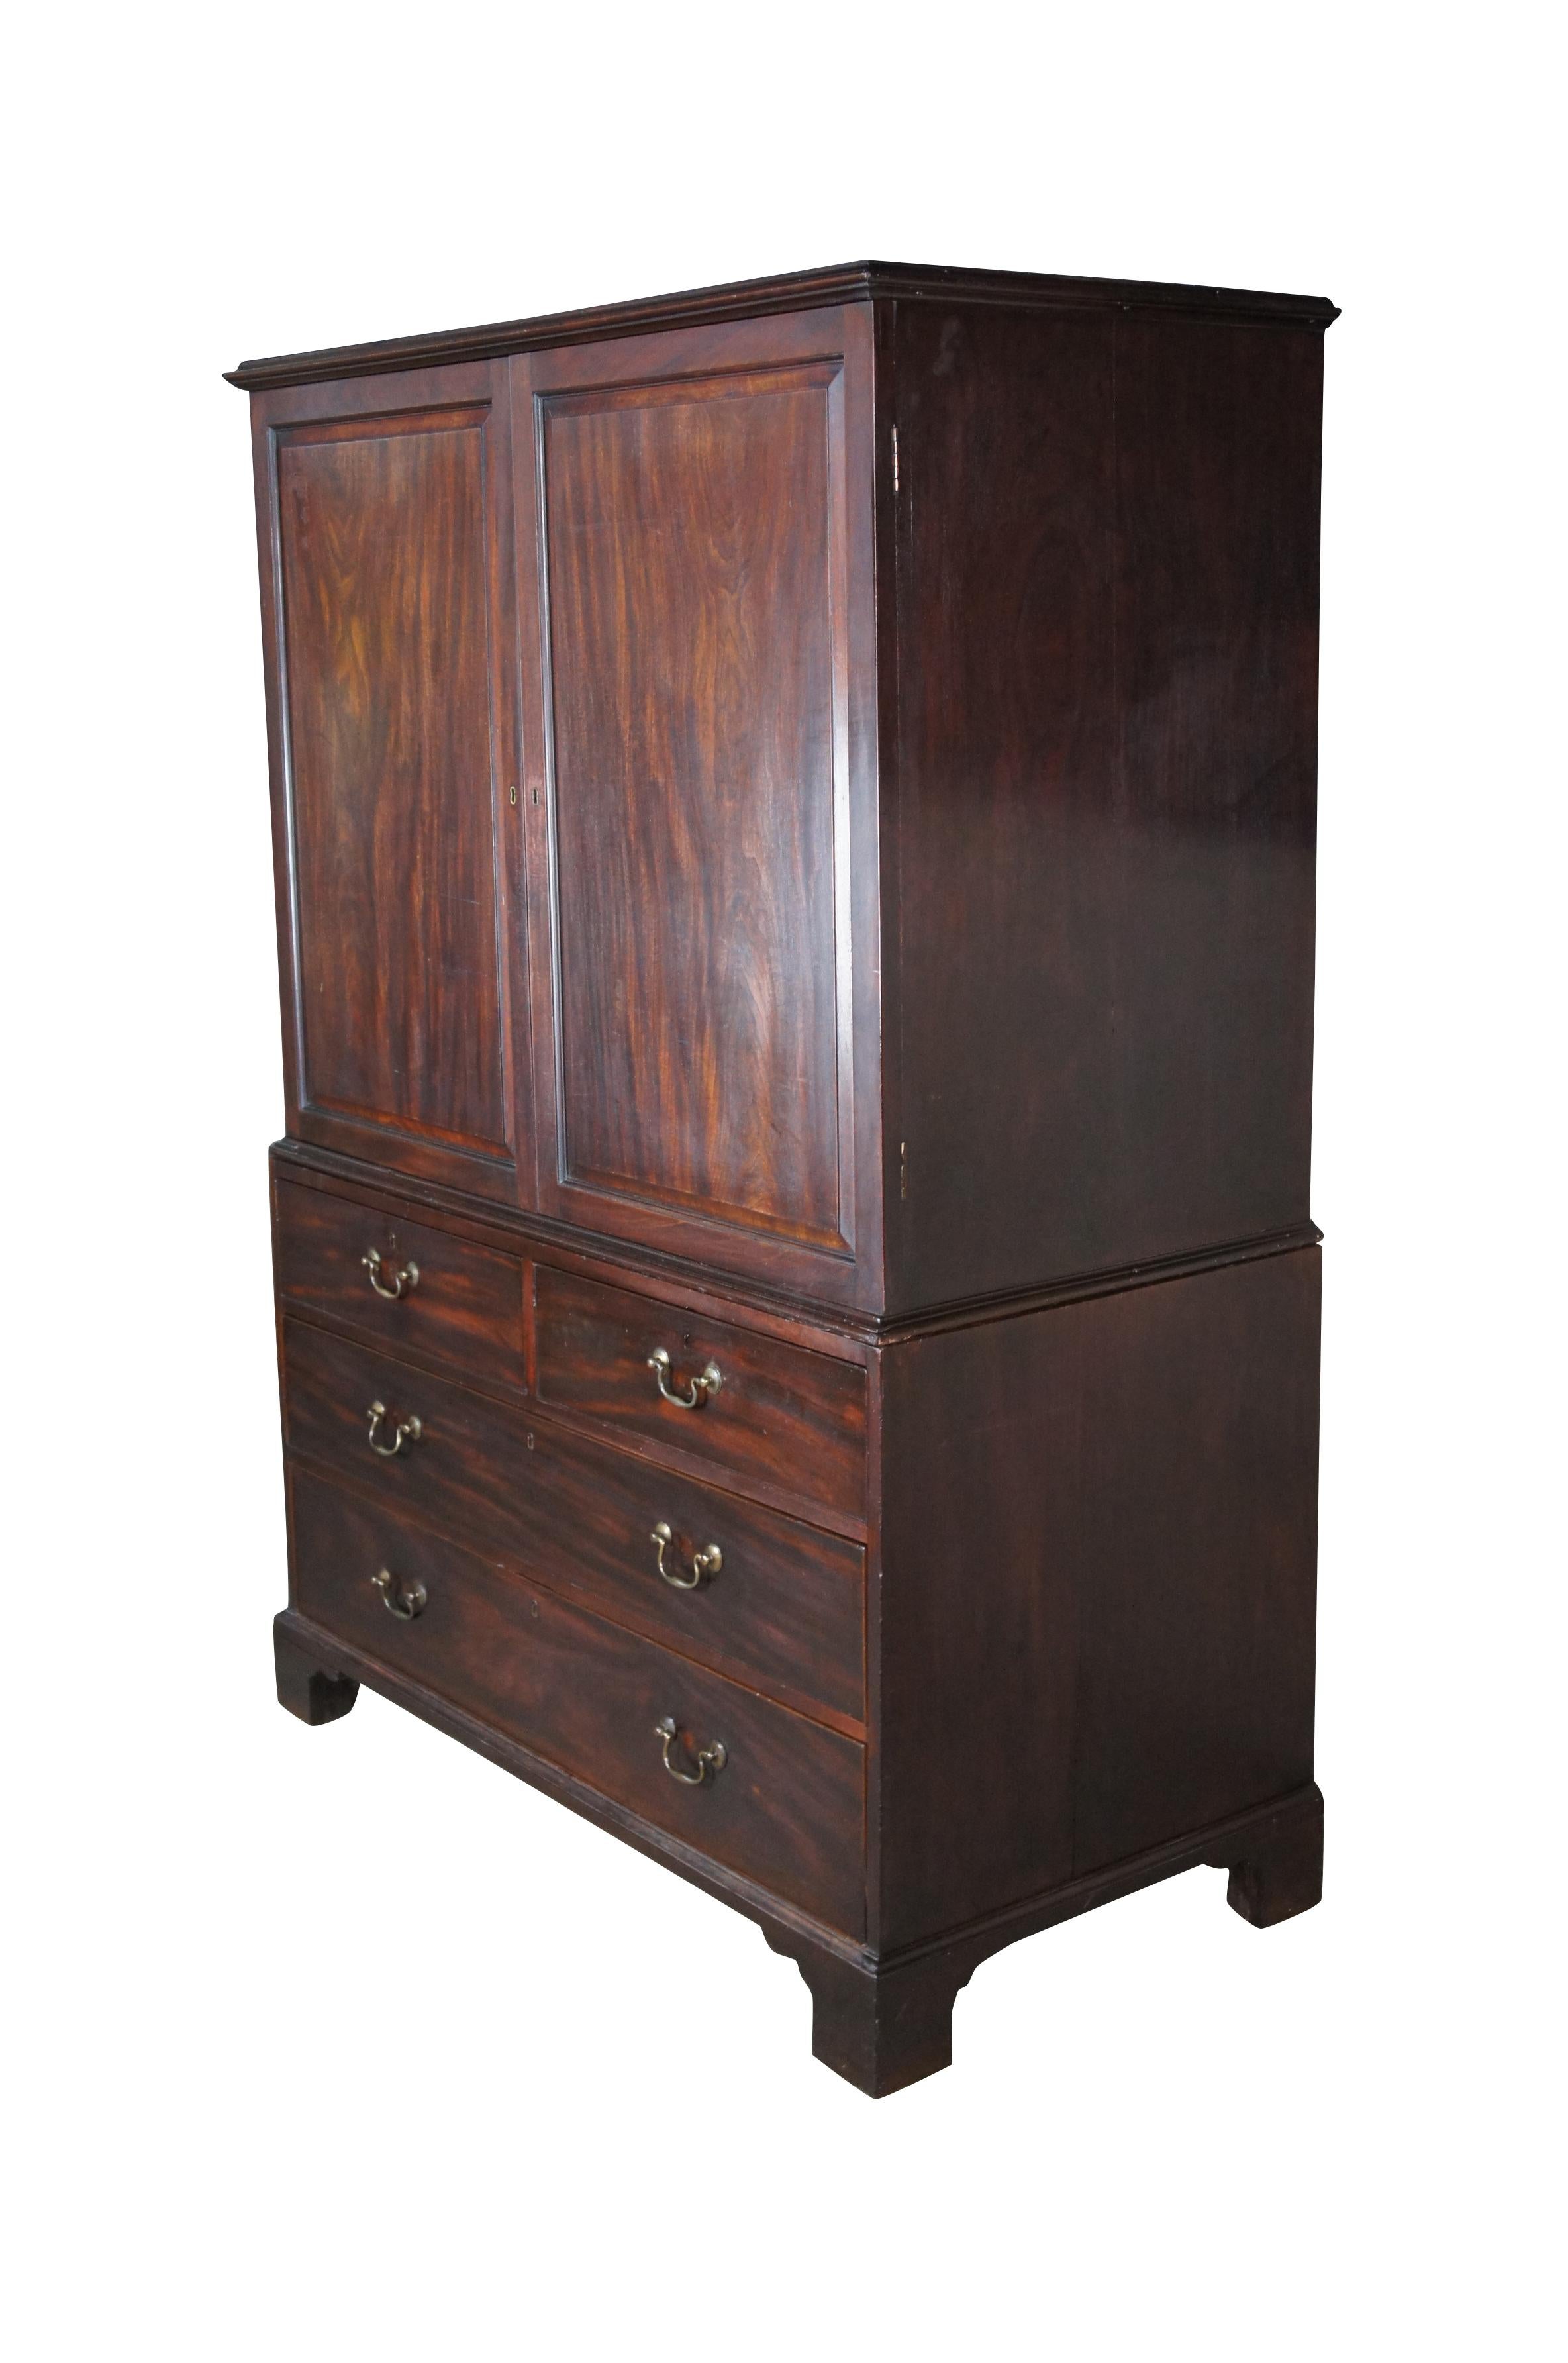 18th Century George III Period Mahogany Linen Press.  A rectangular form with two over three hand dovetailed drawers and an upper closet / wardrobe with one large drawer and two pullouts for hangers.  The cabinet is accented by brass bale hardware